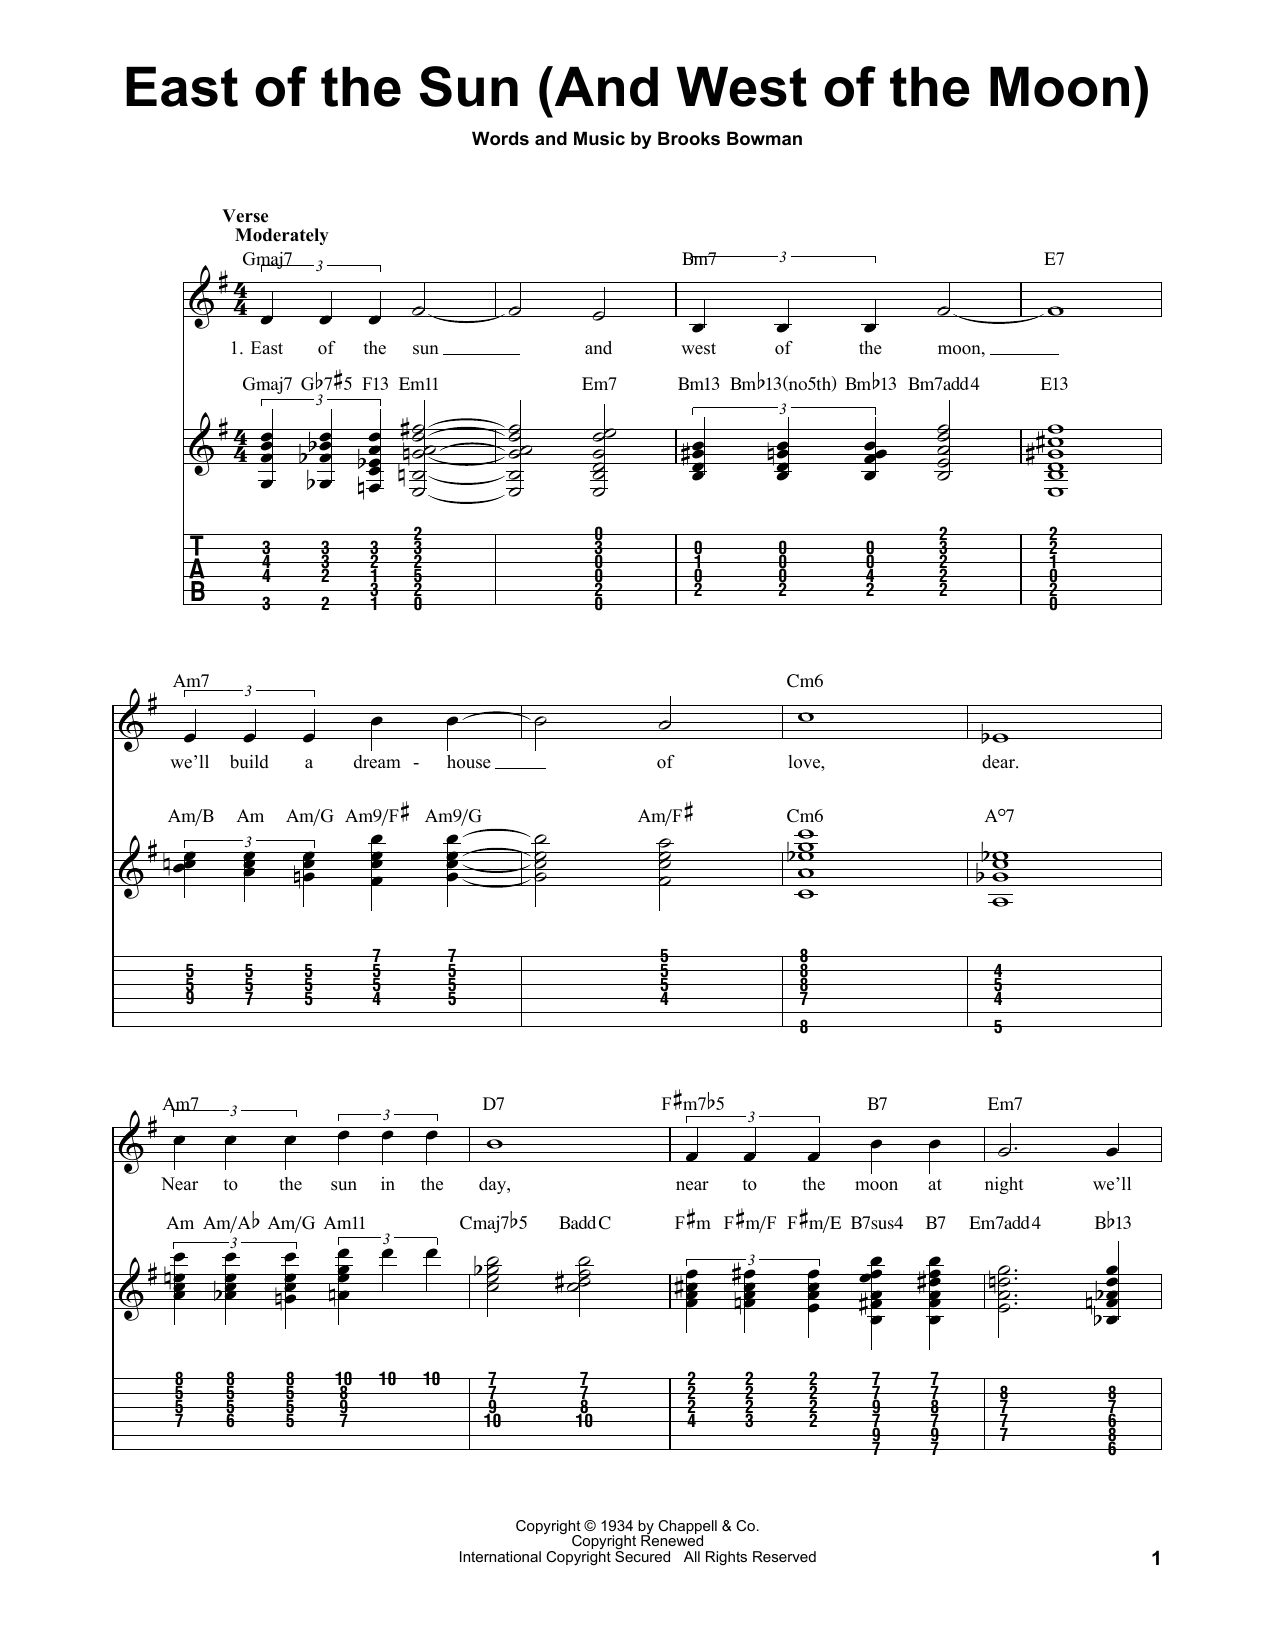 East Of The Sun (And West Of The Moon) sheet music